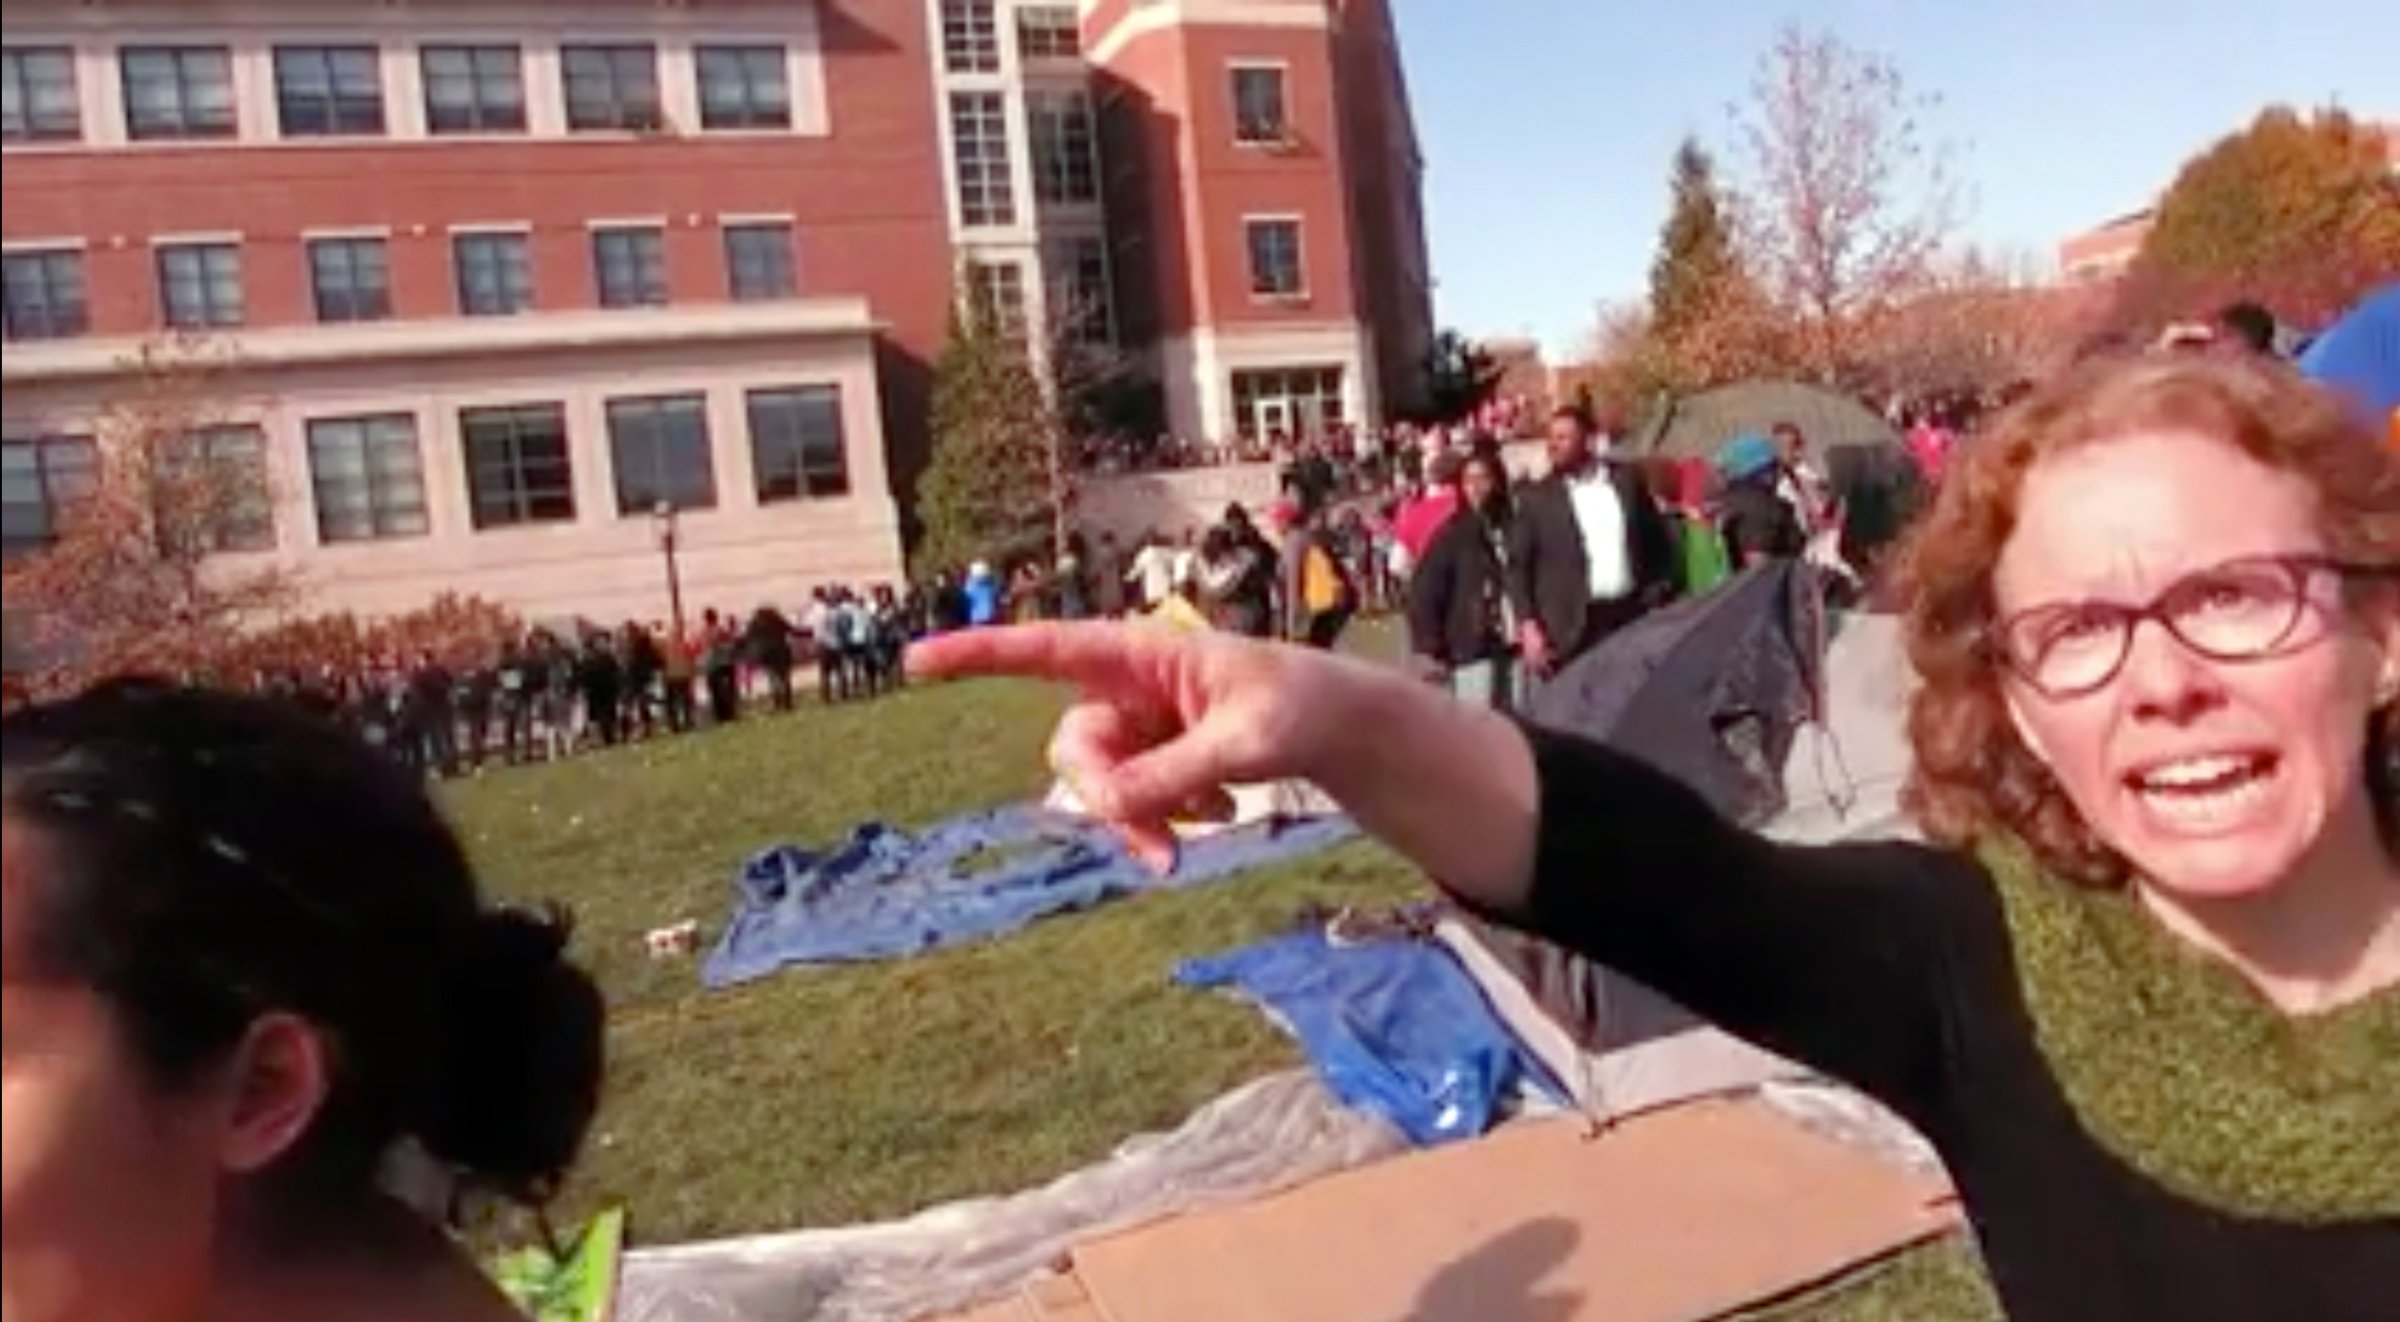 Melissa Click confronts Mark Schierbecker and later calls for "muscle" to help remove him from the protest area in Columbia, Mo. on Nov. 9, 2015.